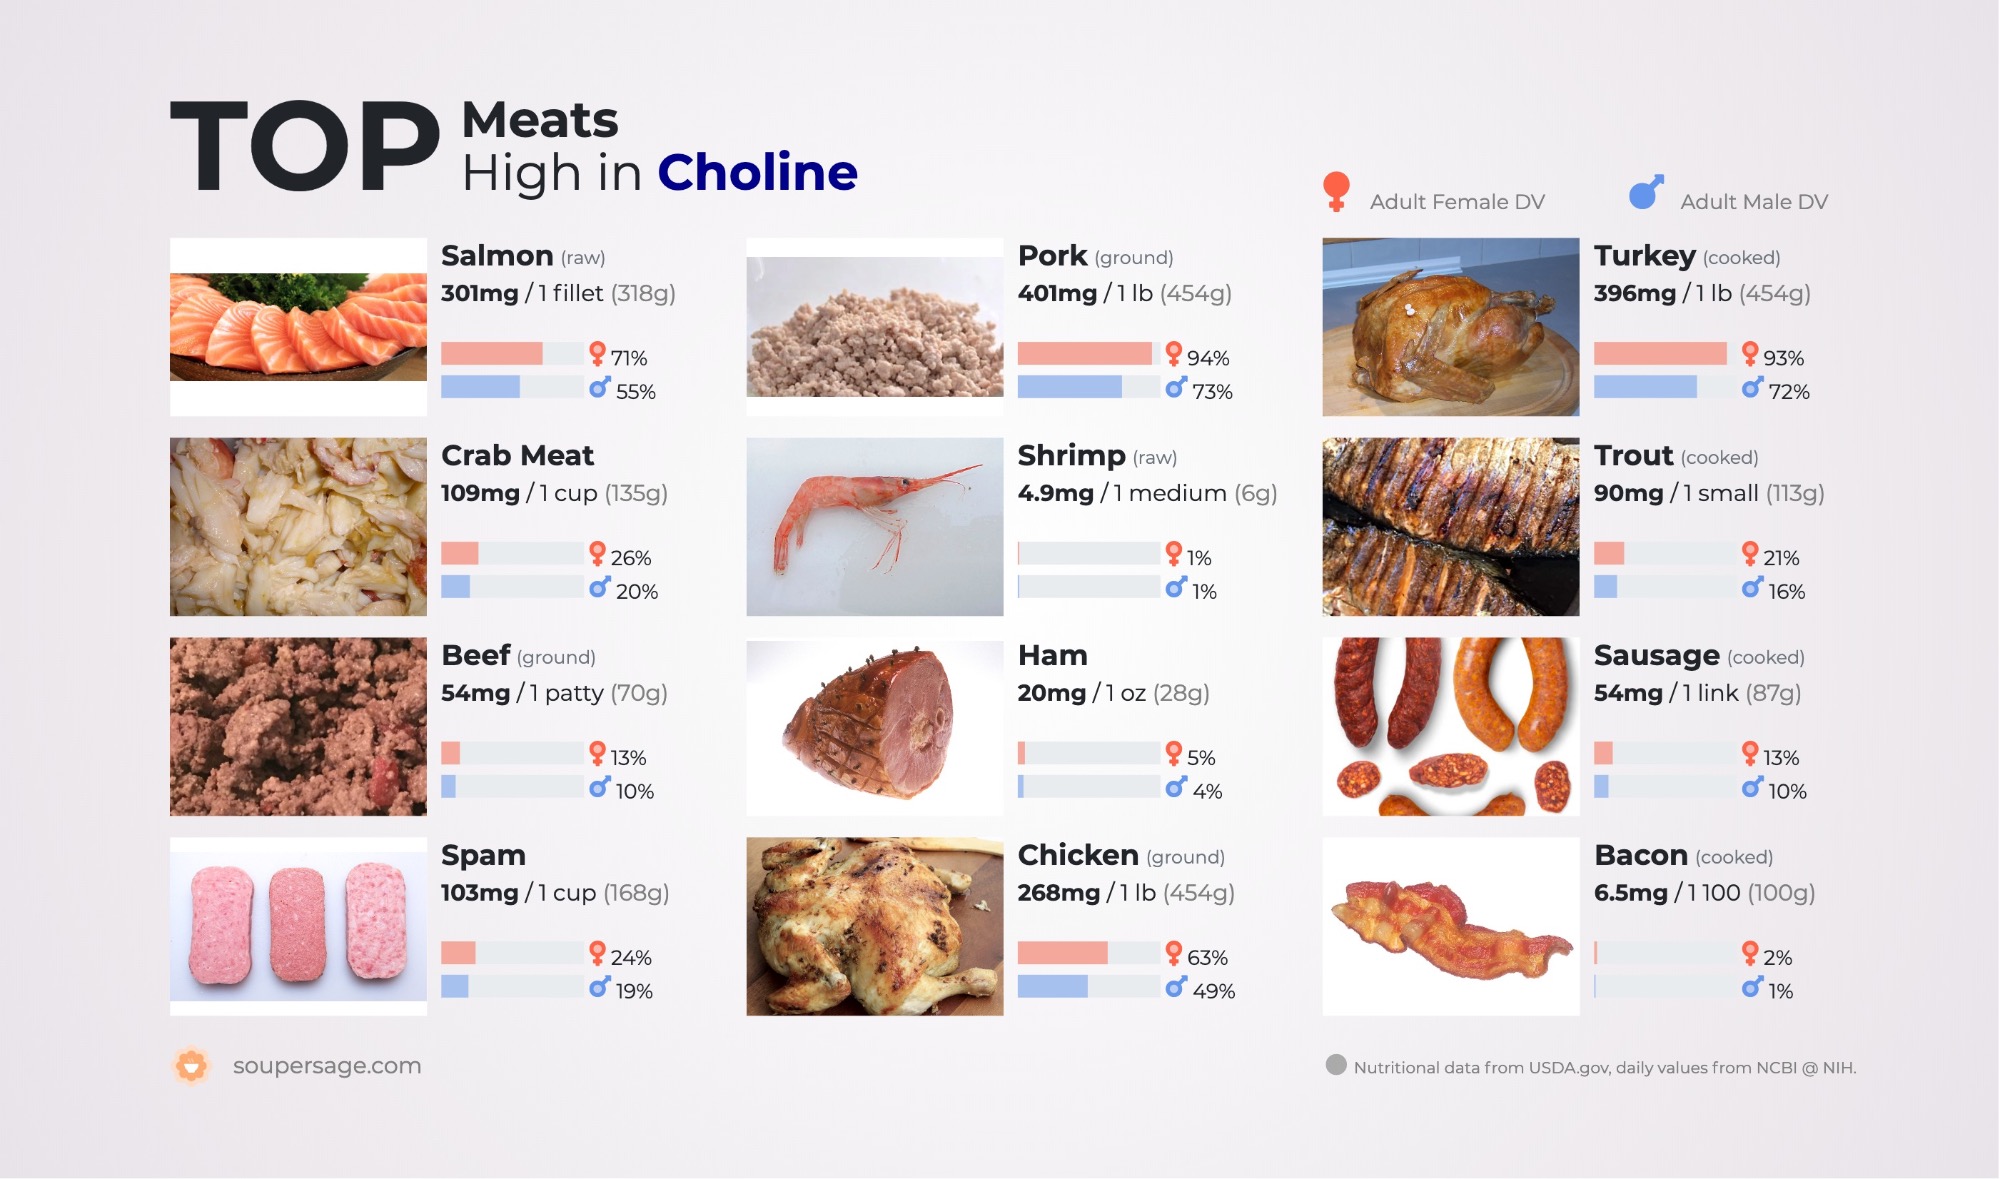 image of Top Meats High in Choline